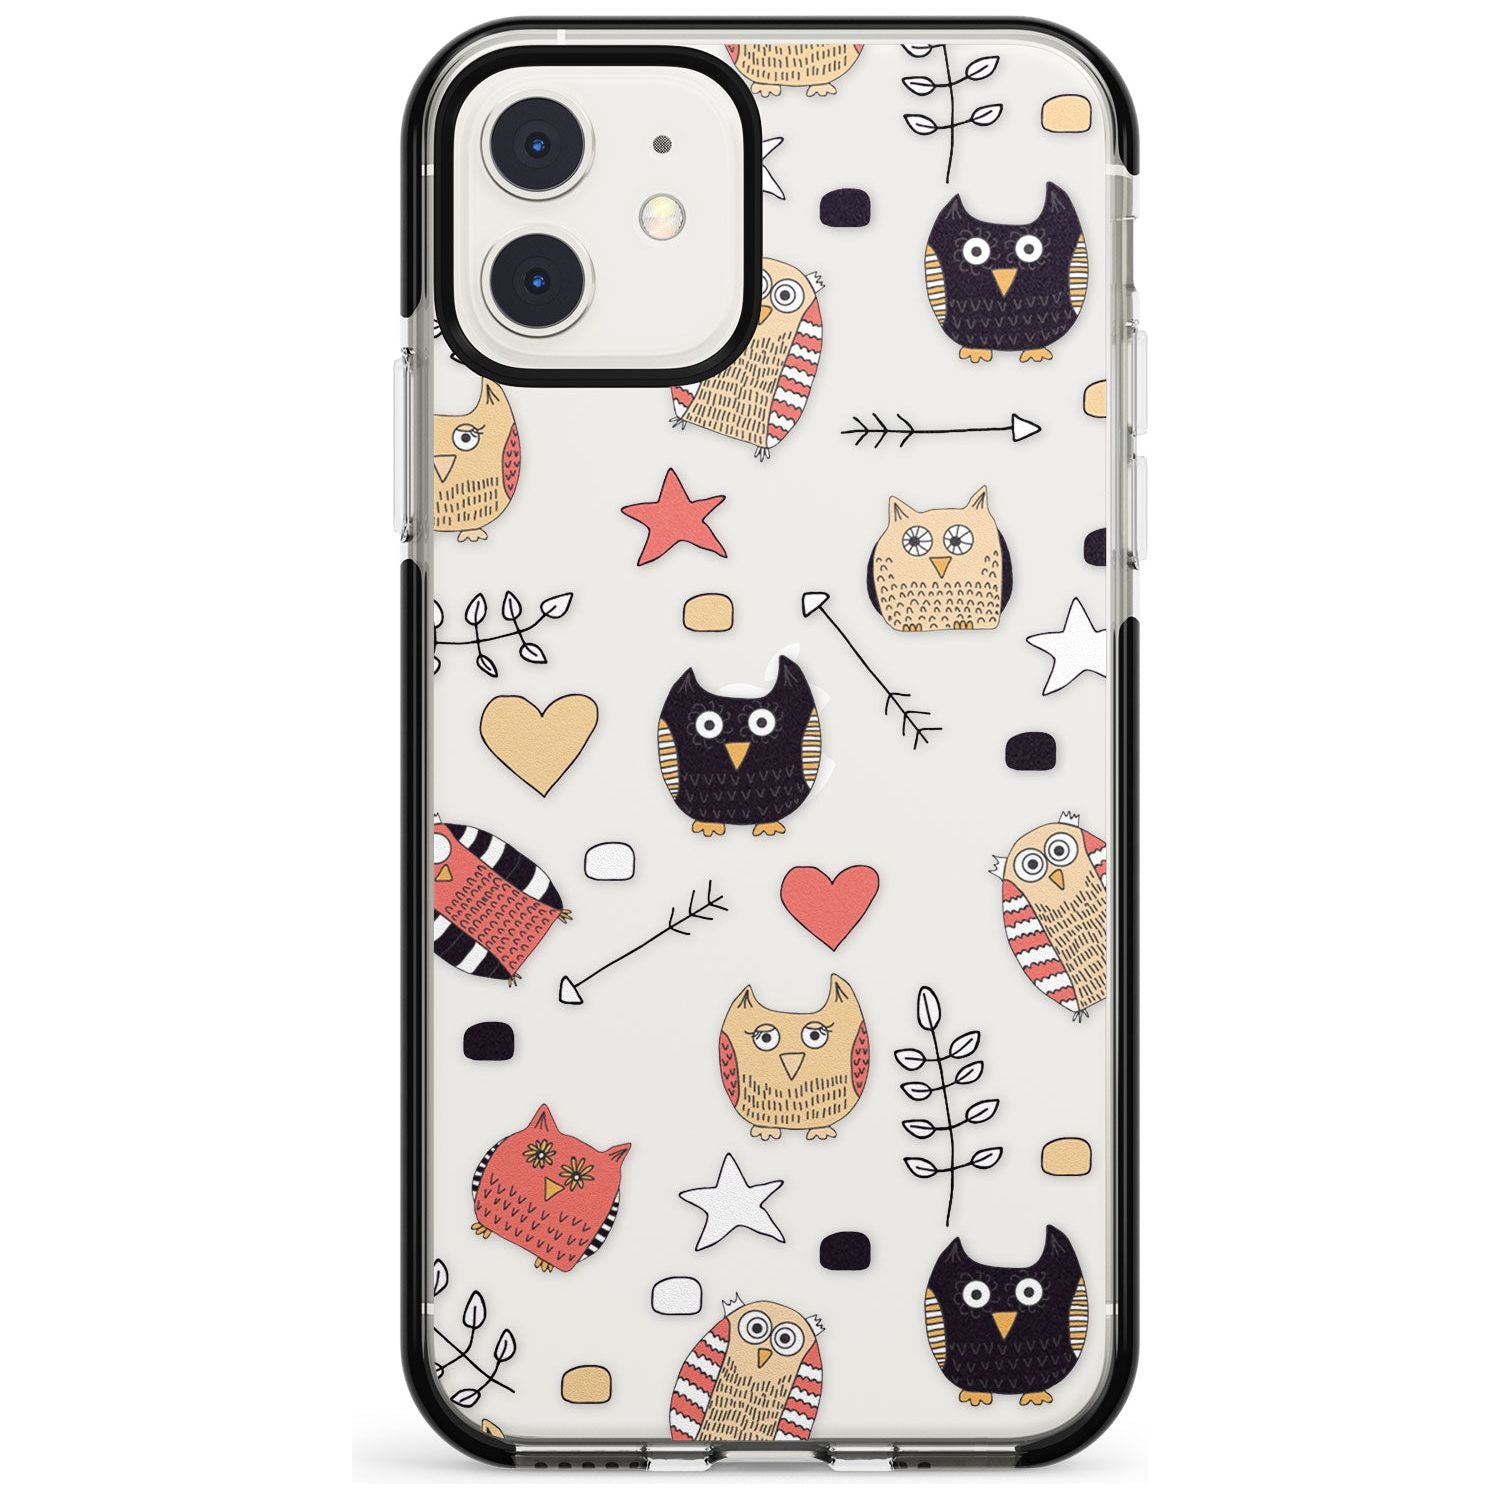 Cute Owl Pattern Black Impact Phone Case for iPhone 11 Pro Max